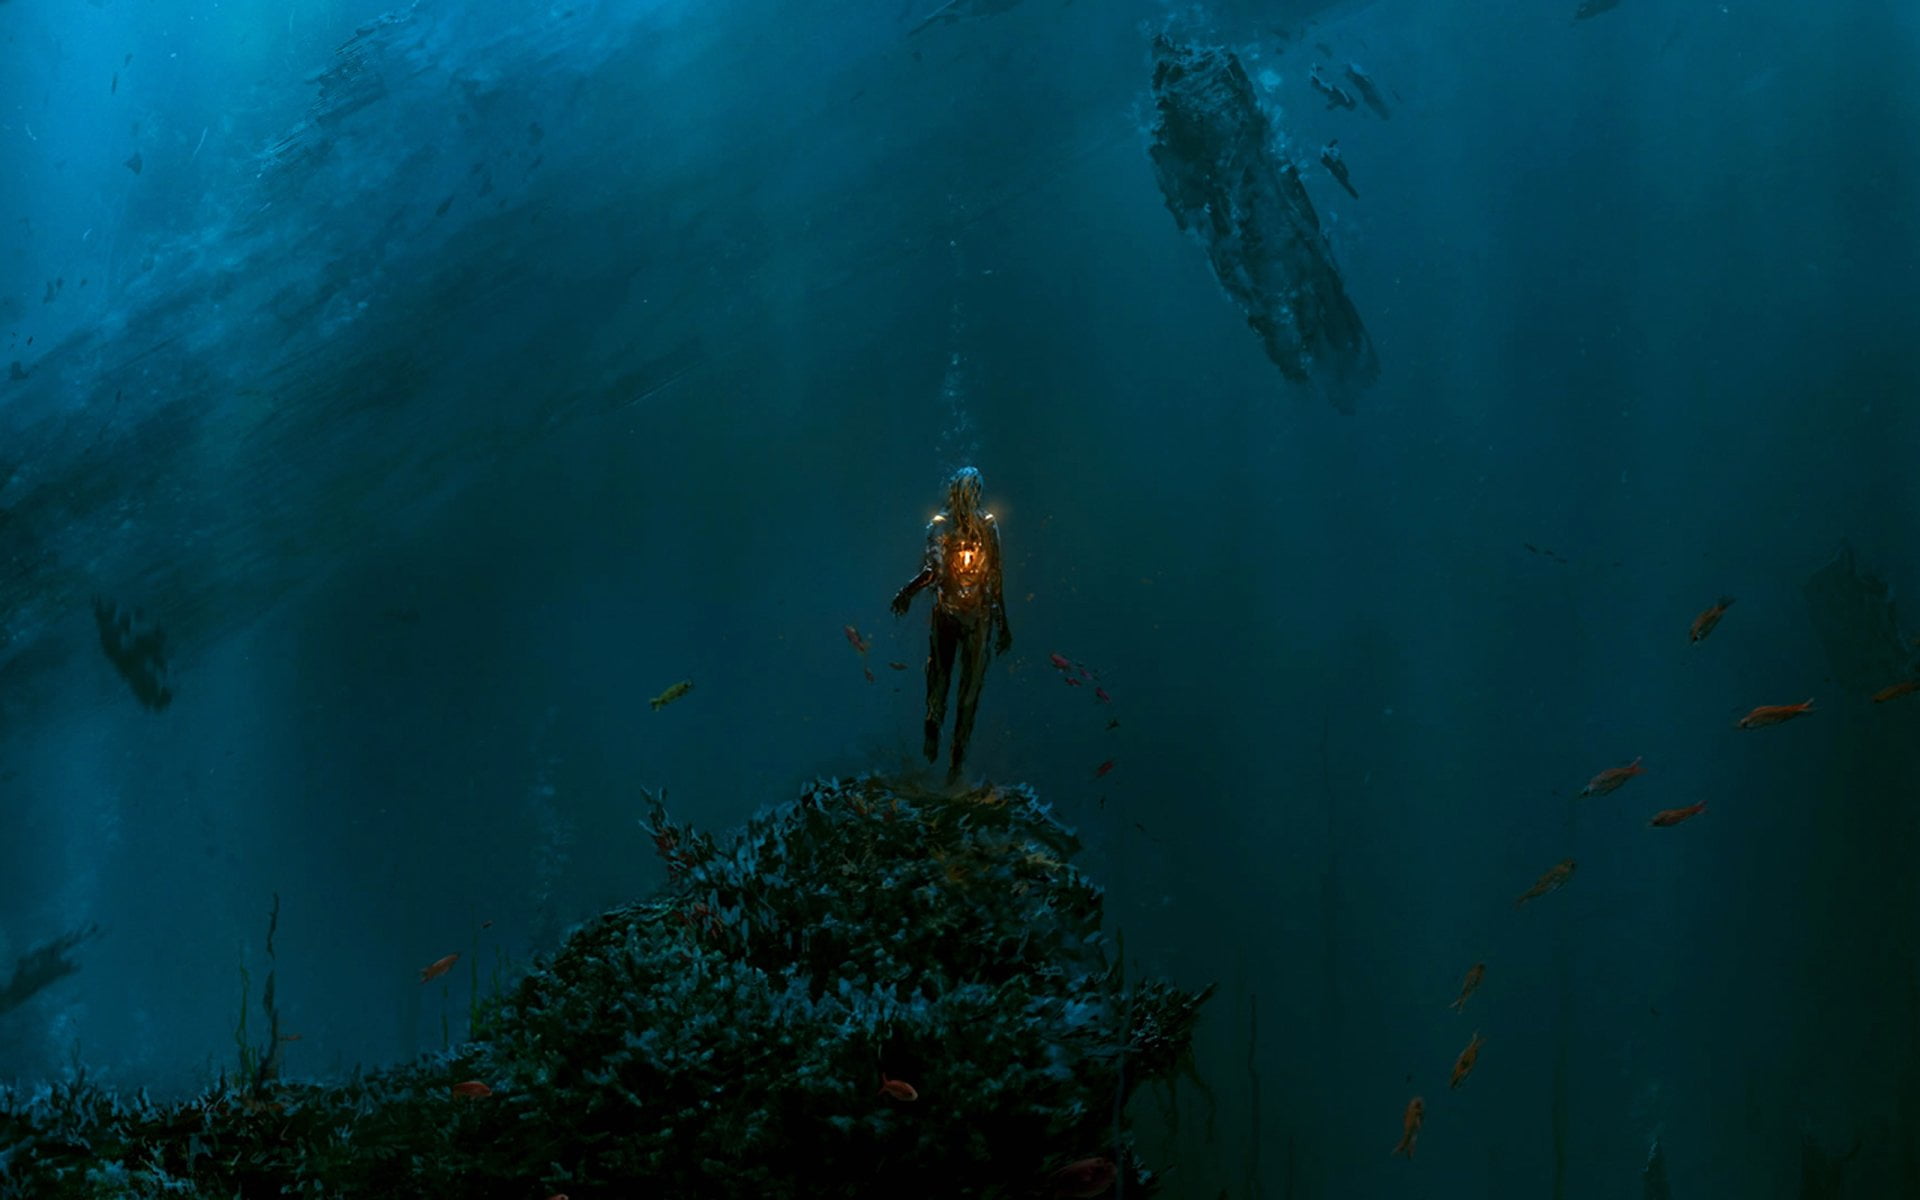 person ding underwater near fishes, Fantasy, Ocean, sea, swimming